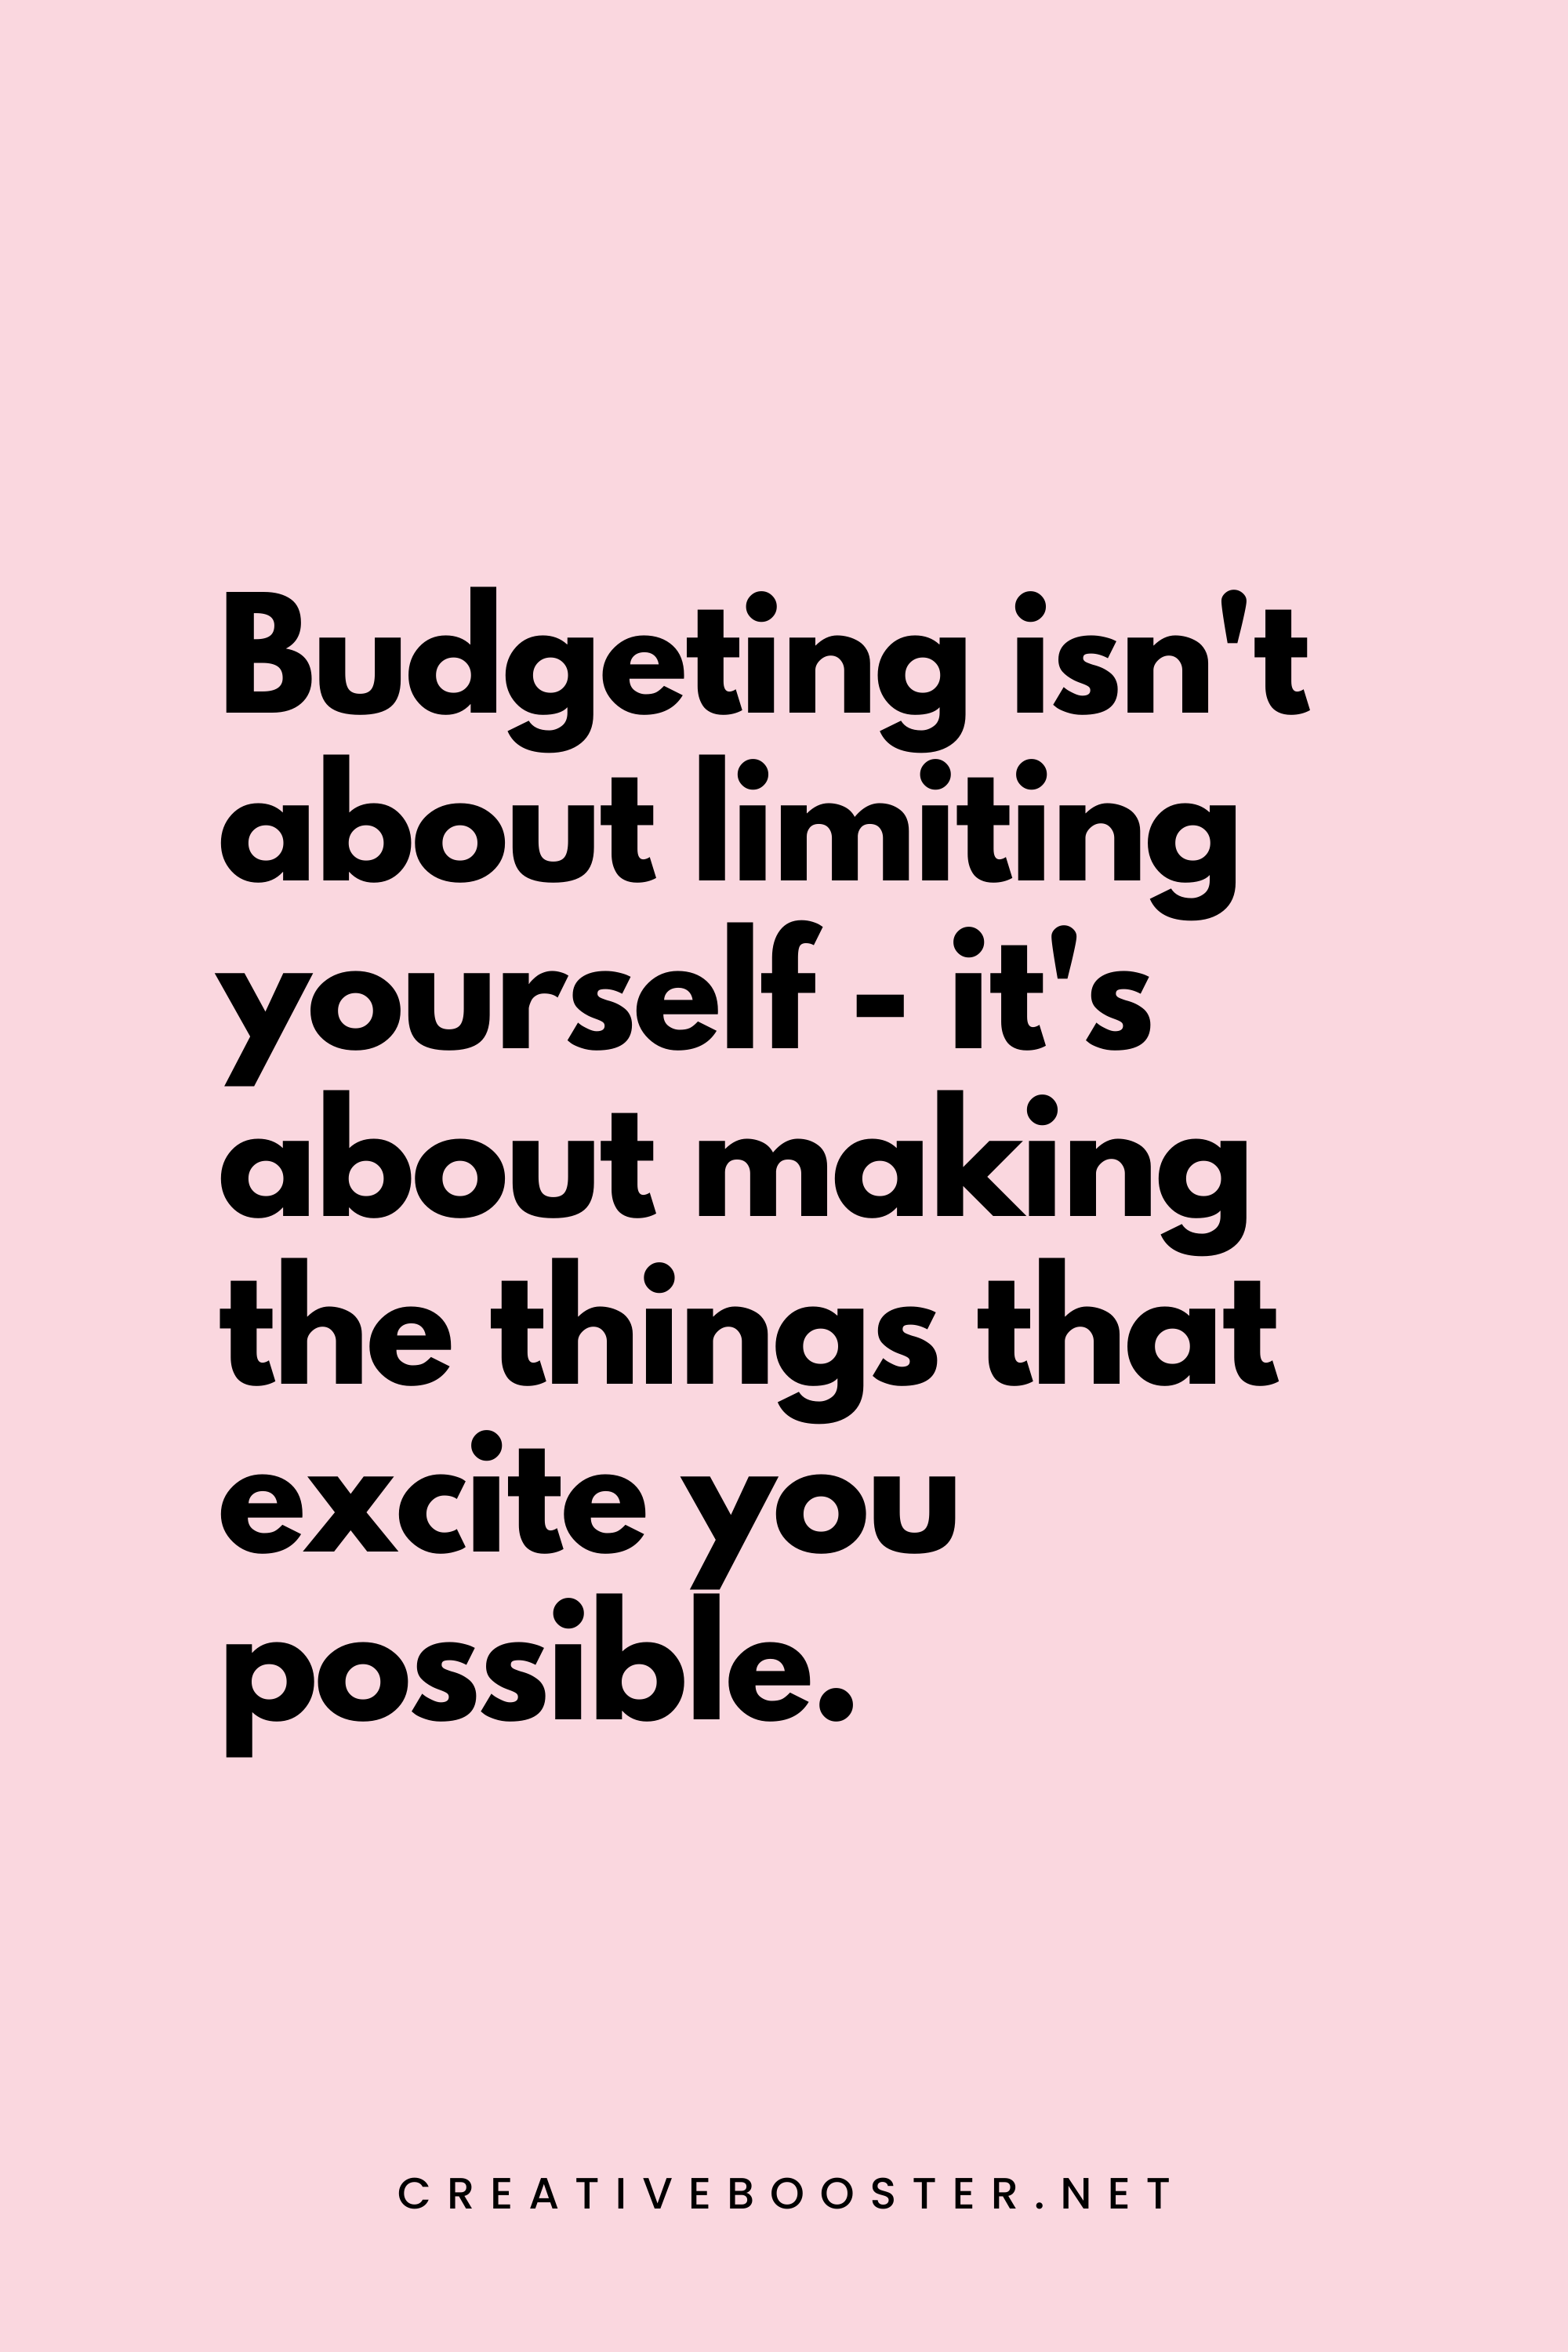 31. Budgeting isn't about limiting yourself - it's about making the things that excite you possible. - Unknown - 3. Financial Freedom Quotes for Students